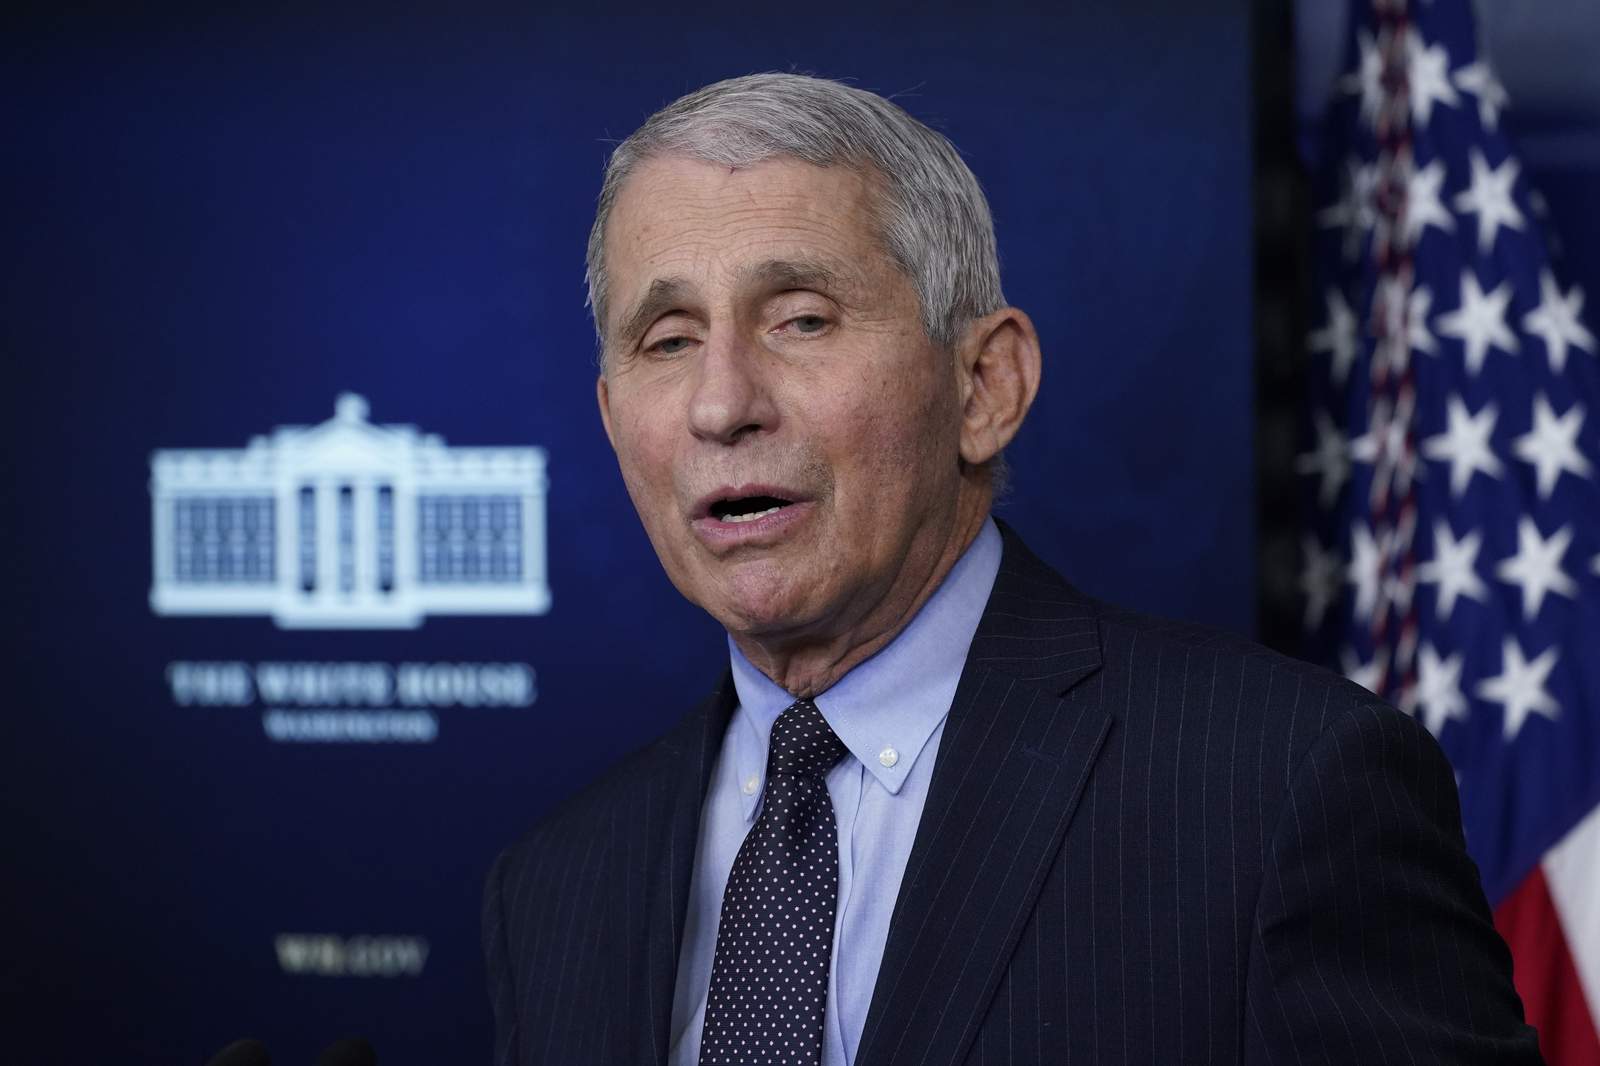 What Fauci said about J&J vaccine: ‘I would have no hesitancy whatsoever to take it’